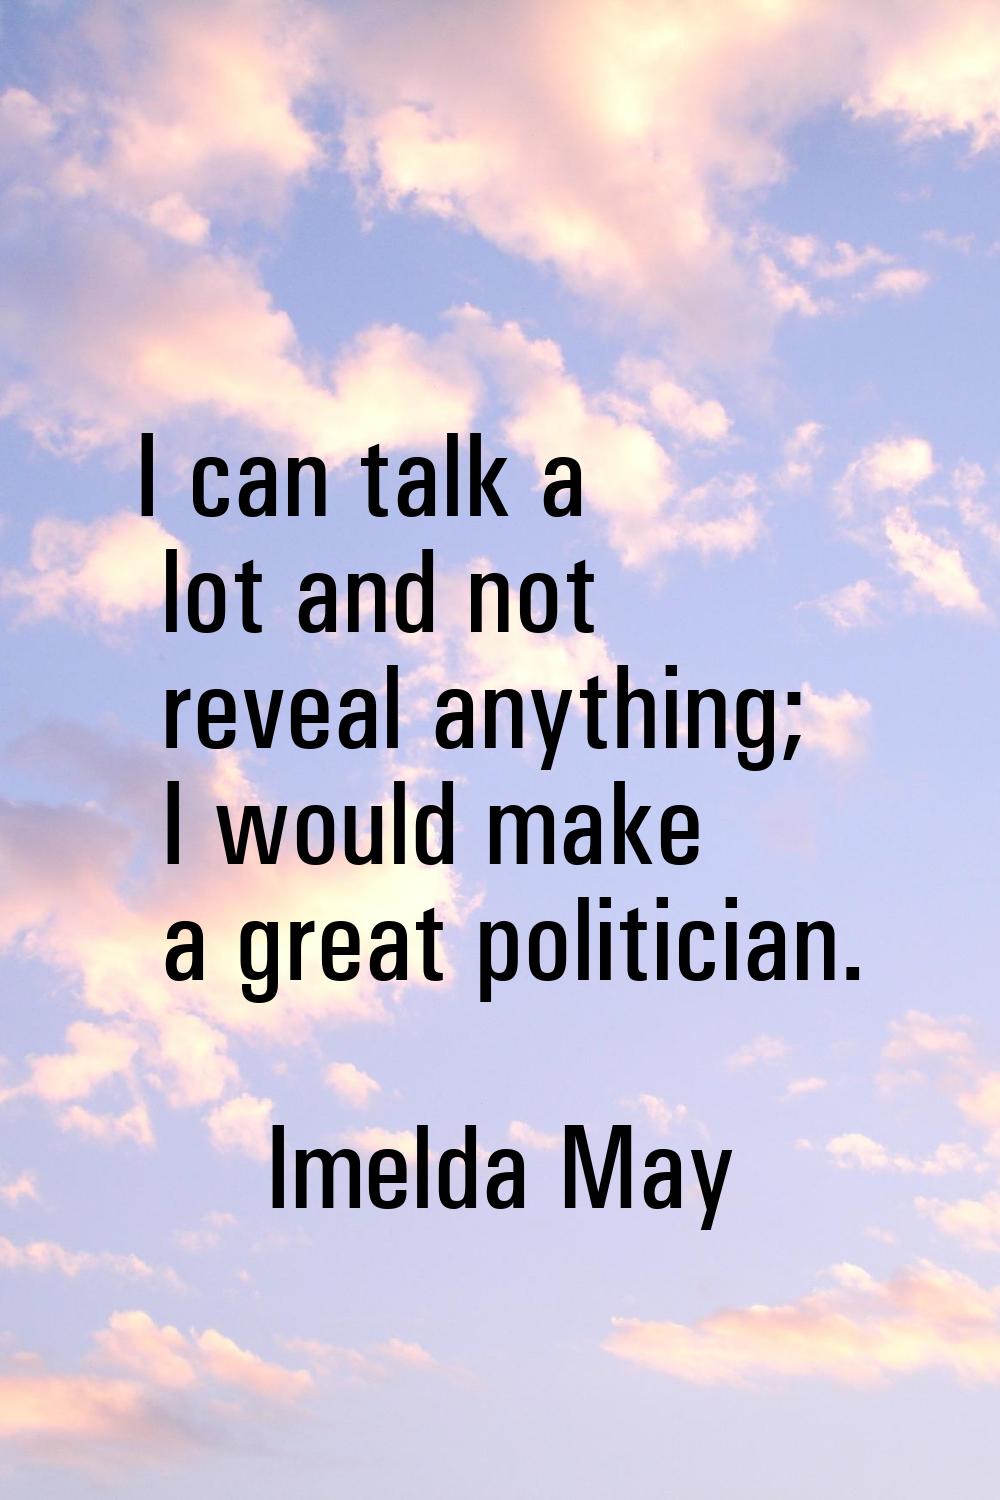 I can talk a lot and not reveal anything; I would make a great politician.